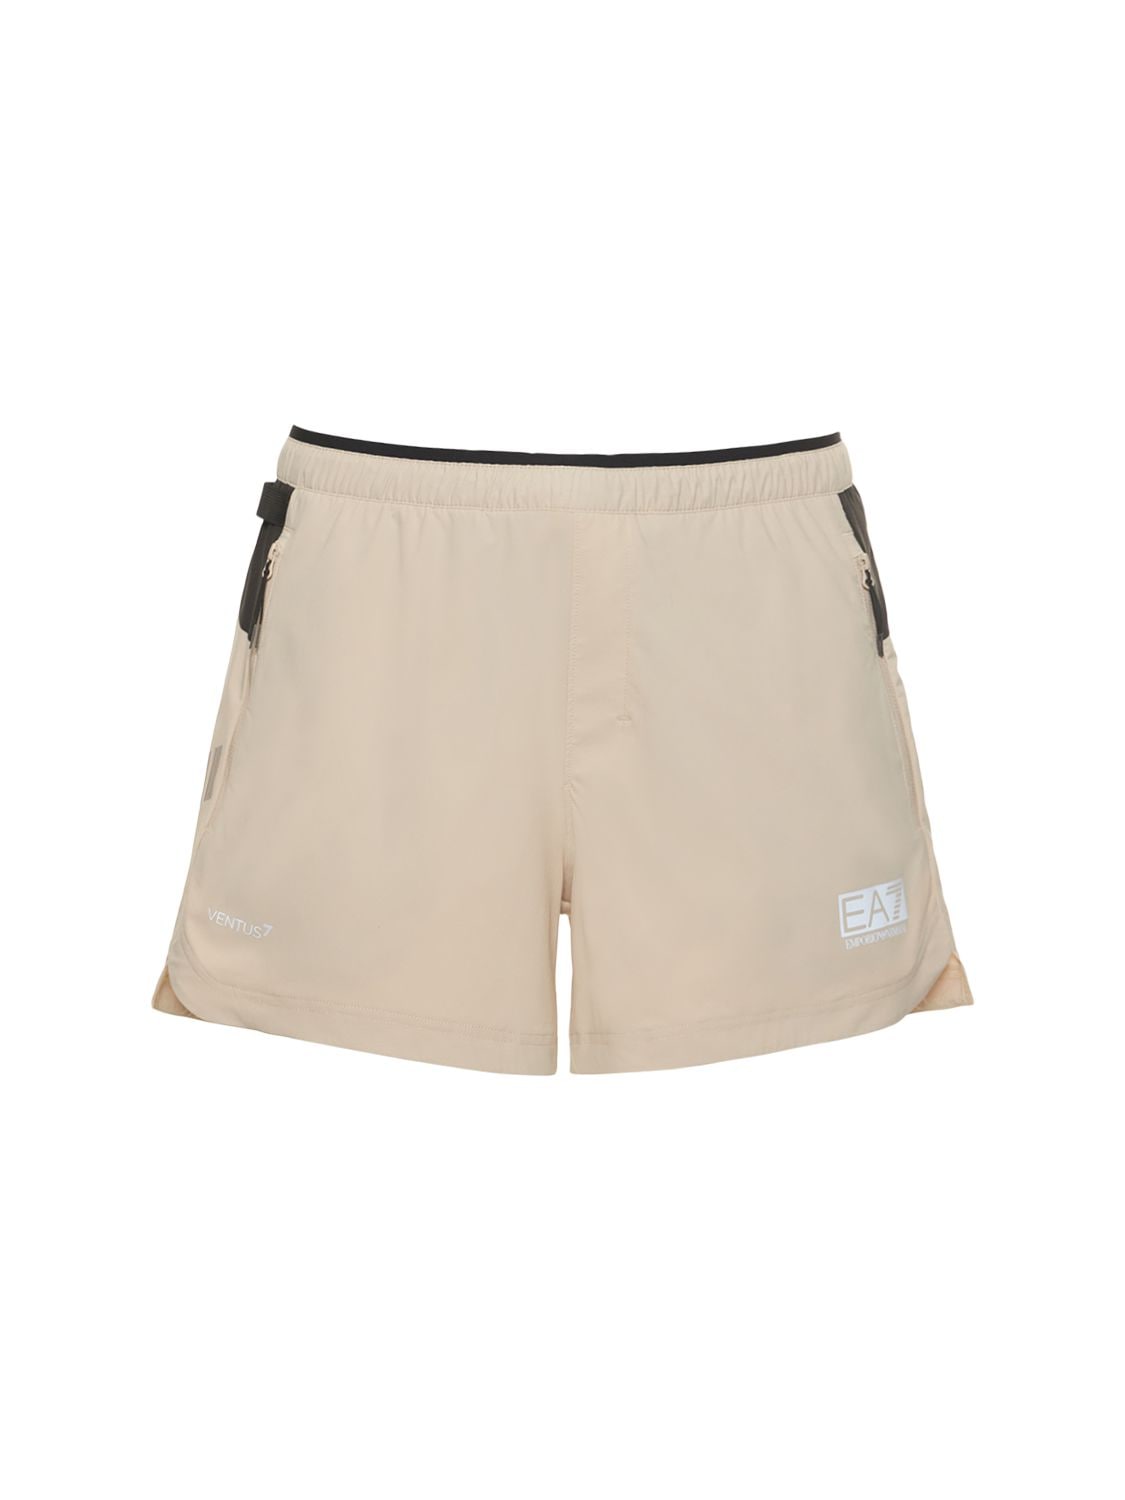 Ventus7 Recycled Poly Track Shorts